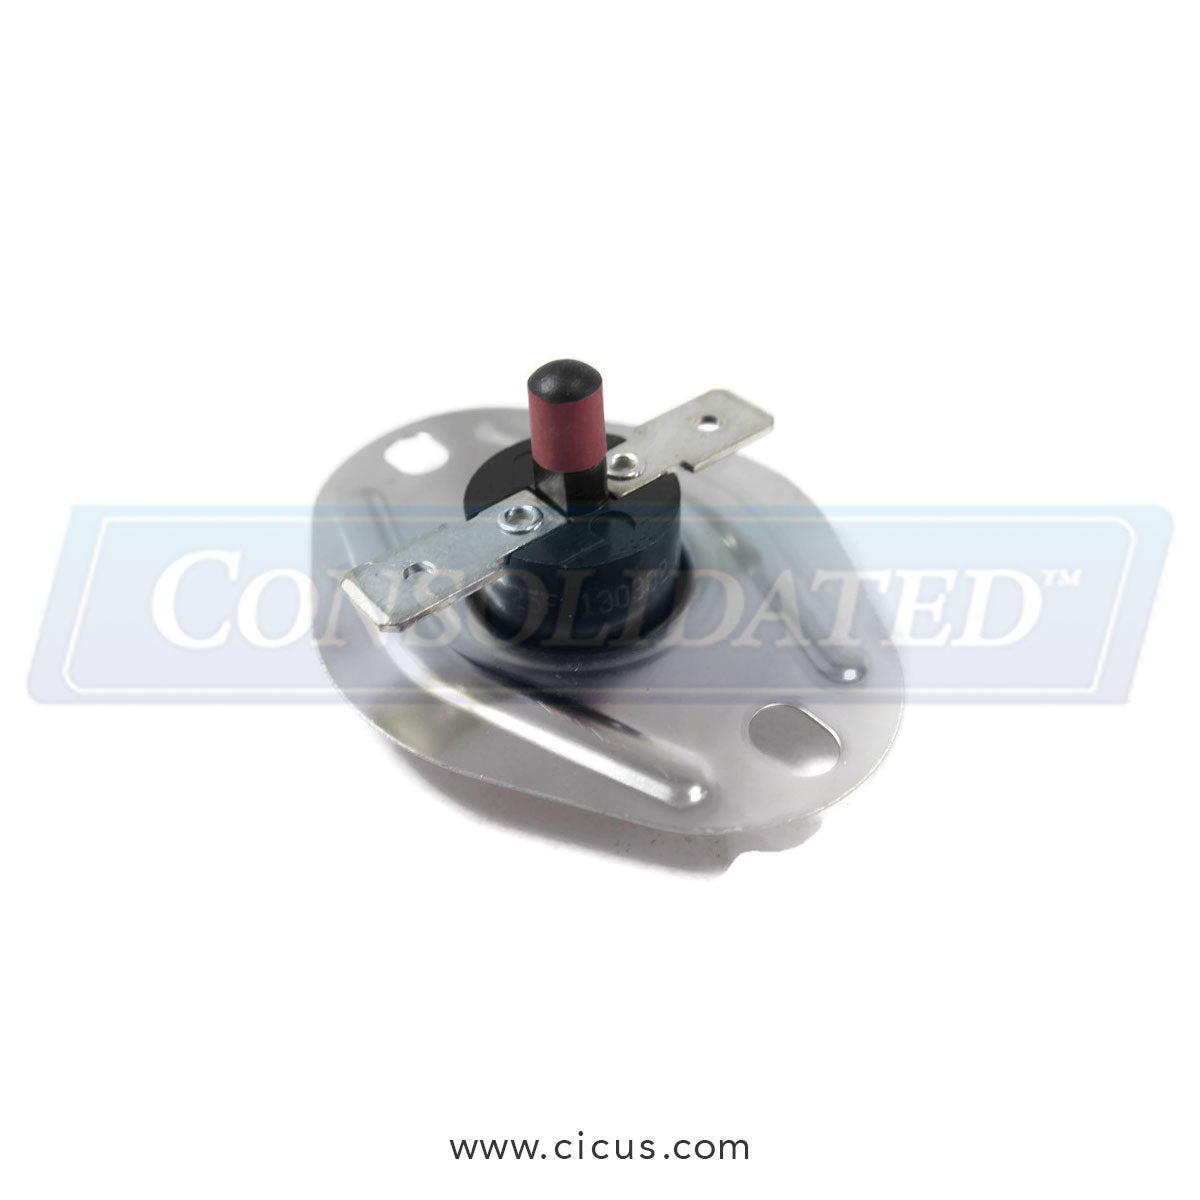 ADC Thermostat - L225 Manual Reset [130302]